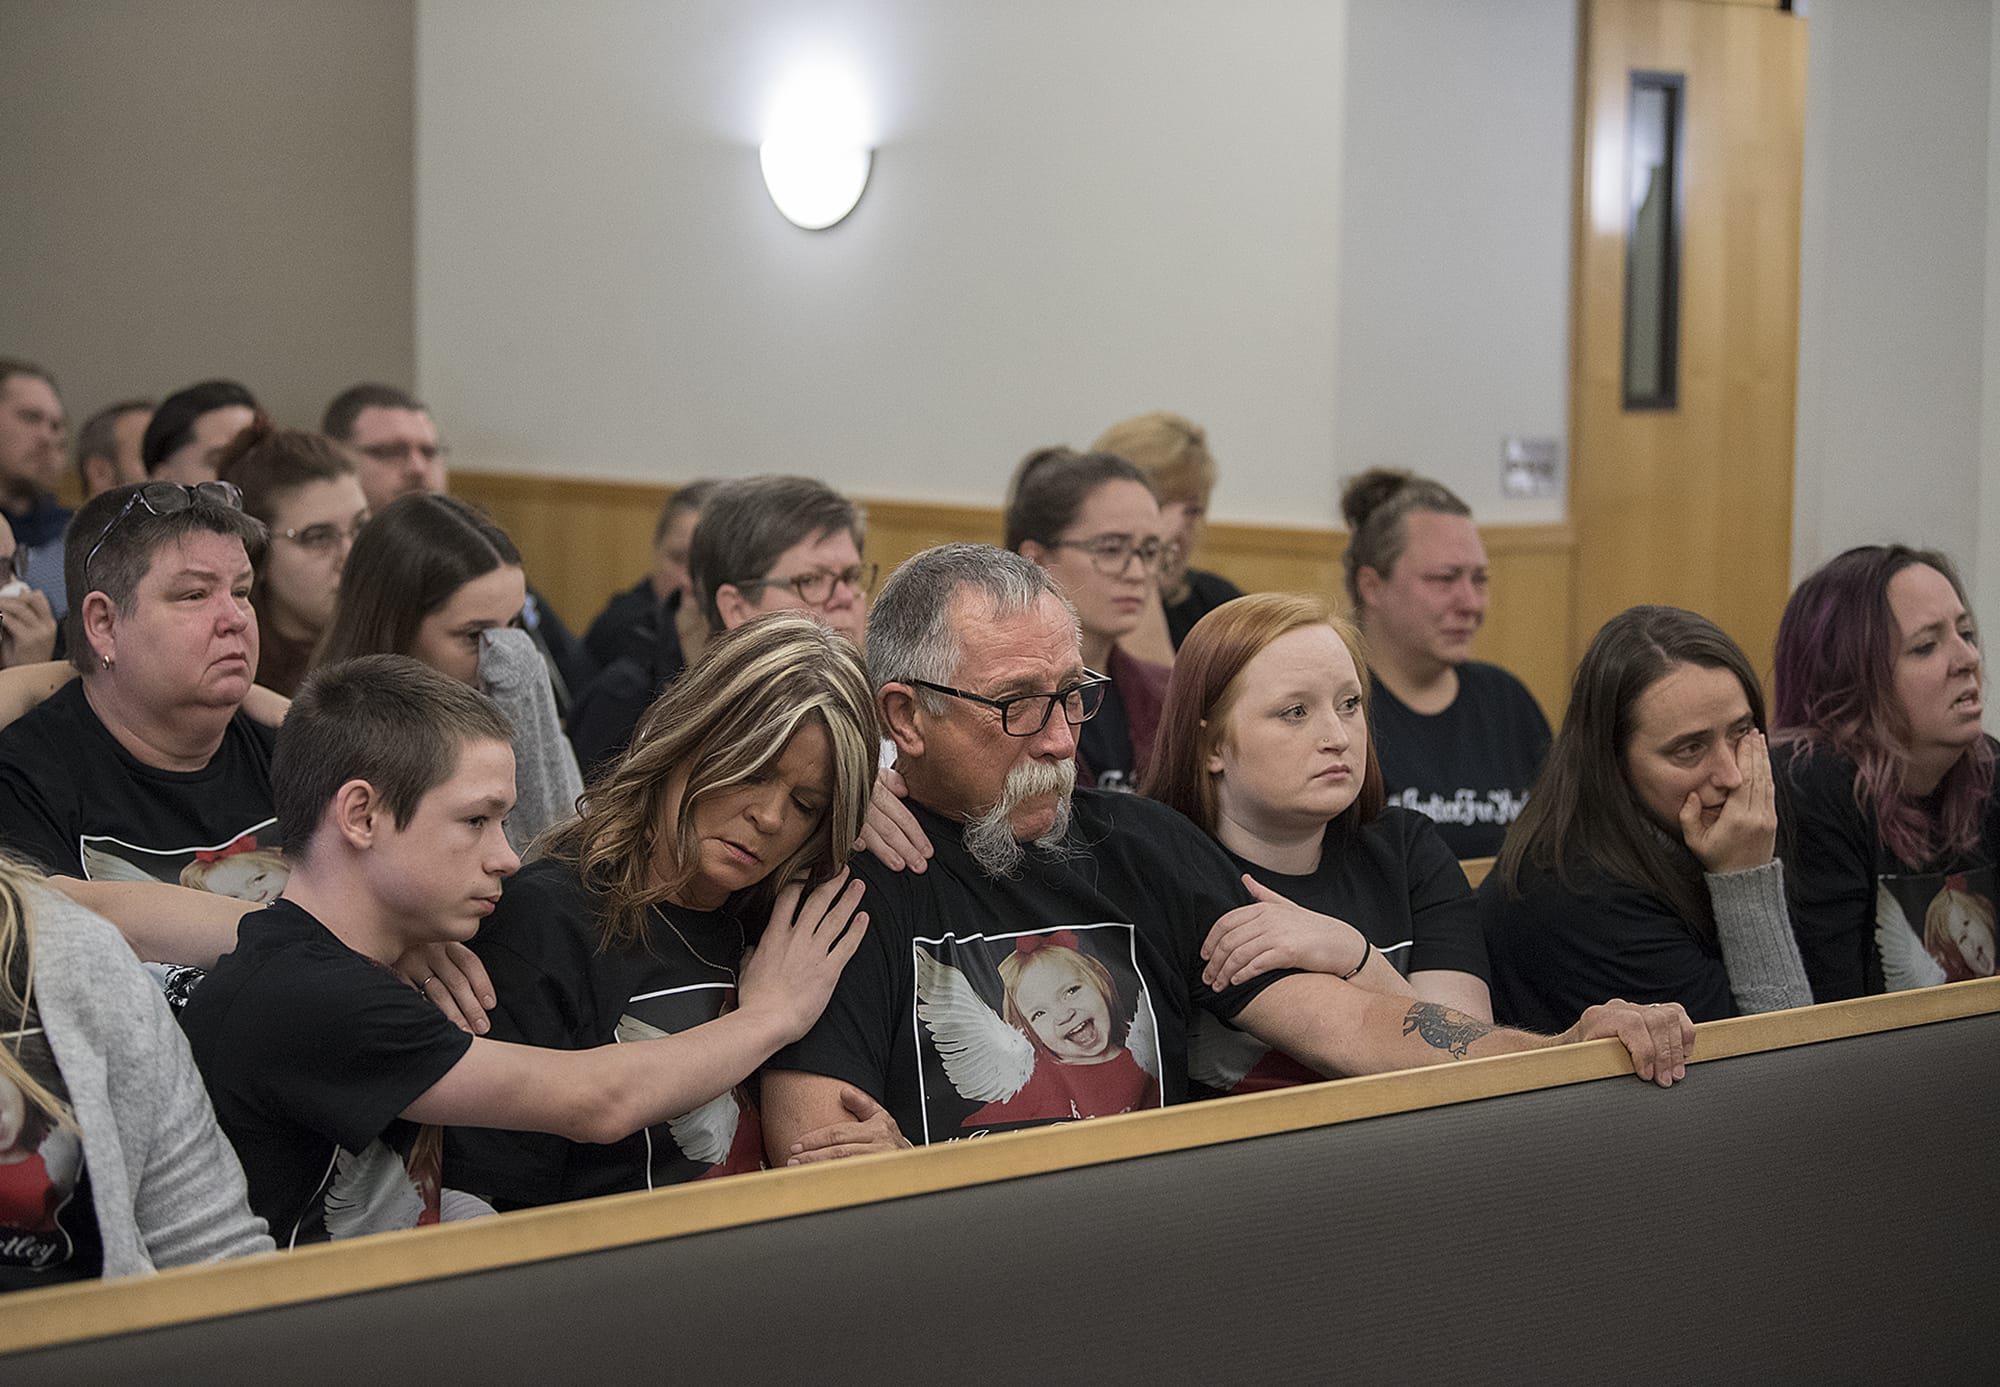 Family and friends of Hartley Anderson gather for the first appearance of Ryan M. Burge, who is suspected of killing the 5-year-old, at the Clark County Courthouse on Monday morning, Nov. 5, 2018.